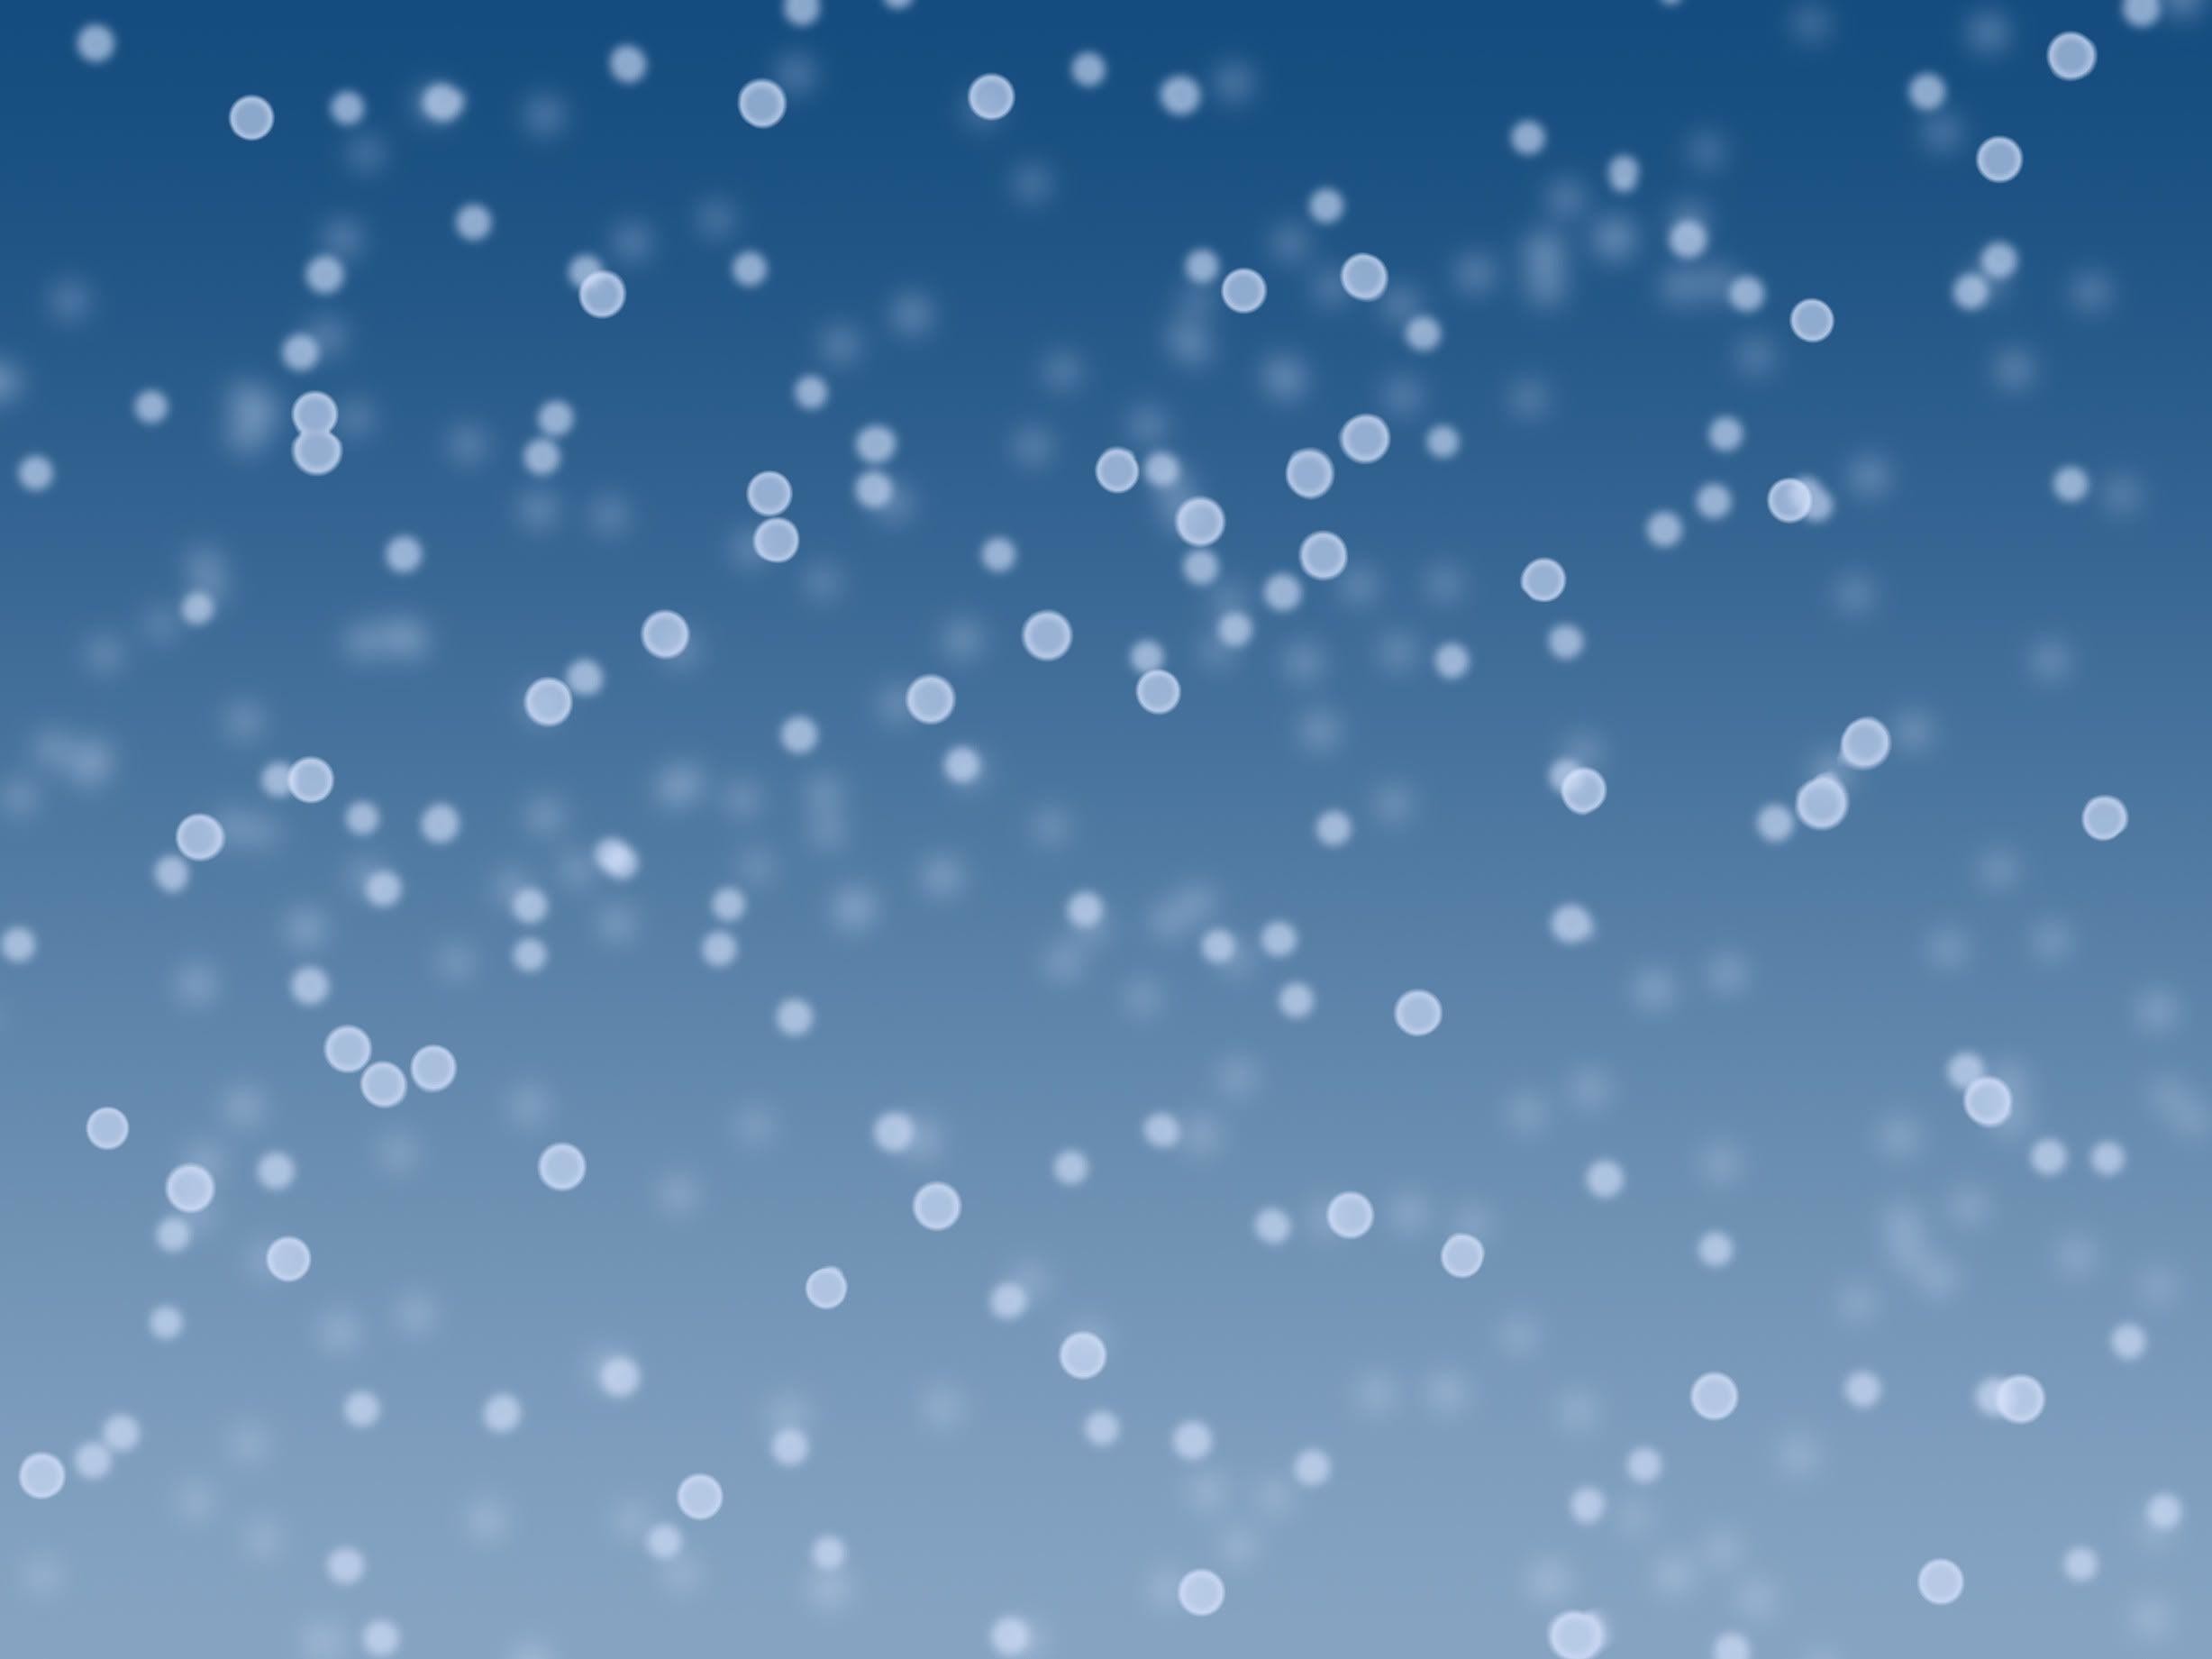 54000 HD Winter Wallpaper Photos for Free Download on Pngtree